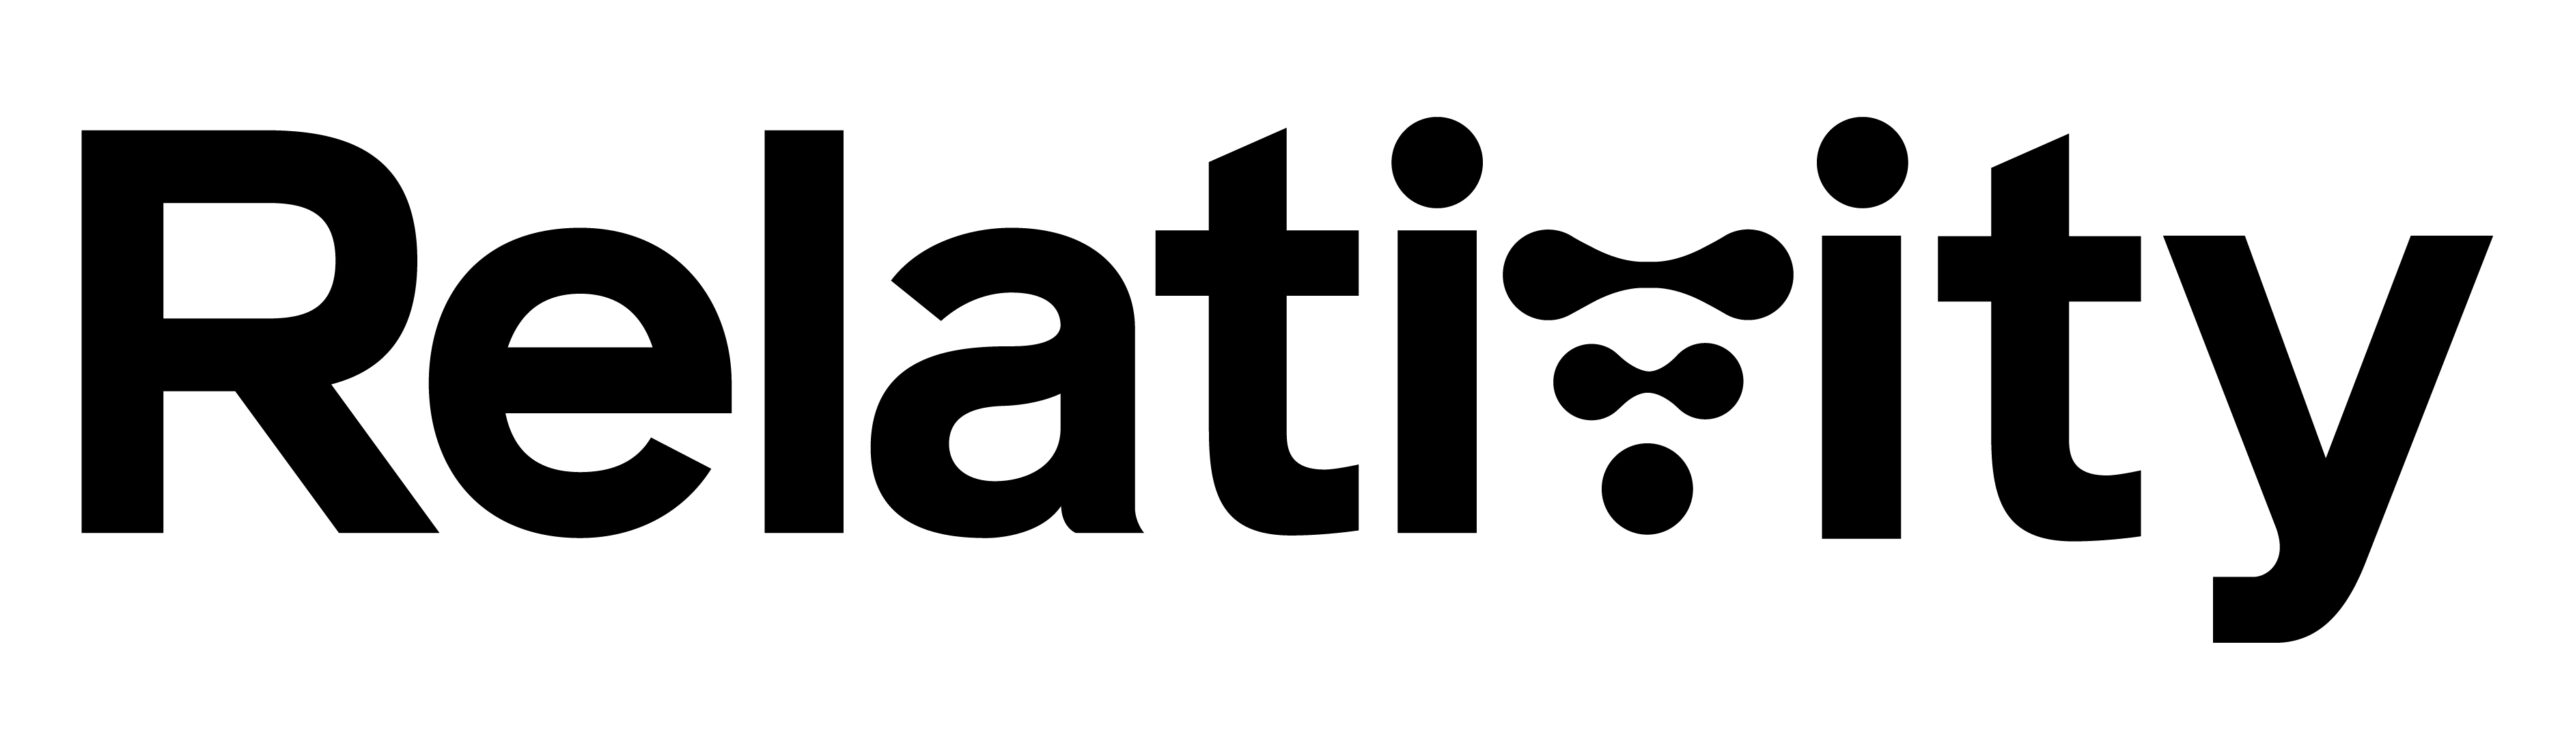 Relativity Space Logo containing the word relativity in black lettering